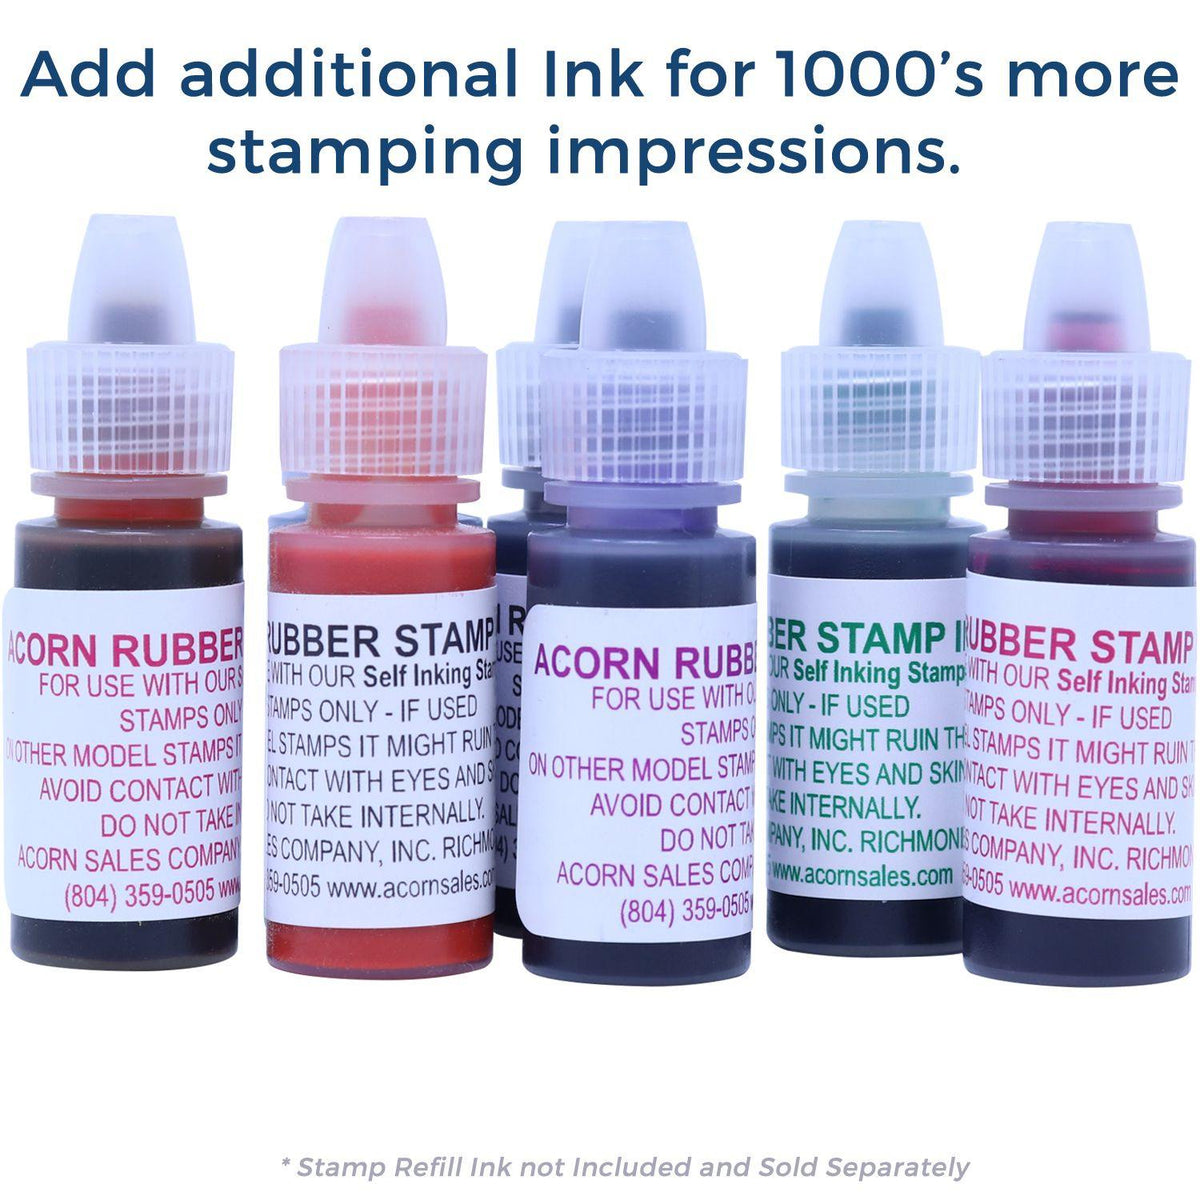 Refill Inks for Large Pre-Inked Superkid Stamp Available